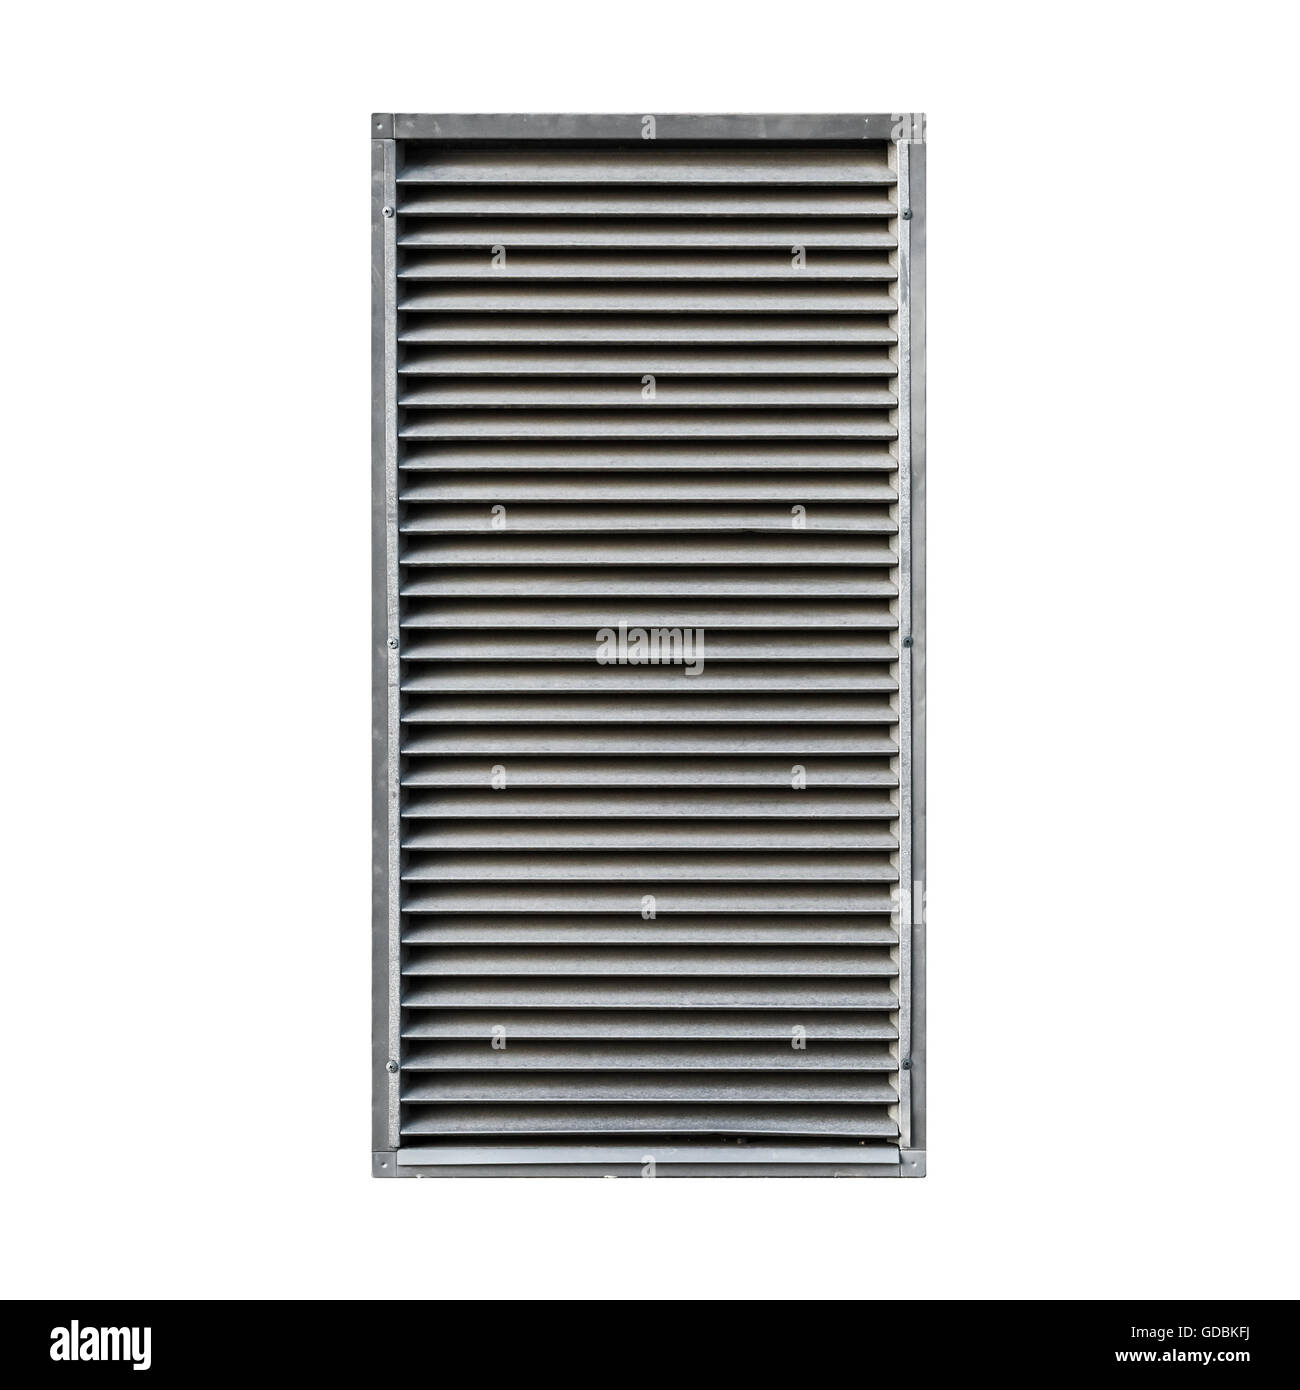 Metal ventilation grille isolated on white background Stock Photo